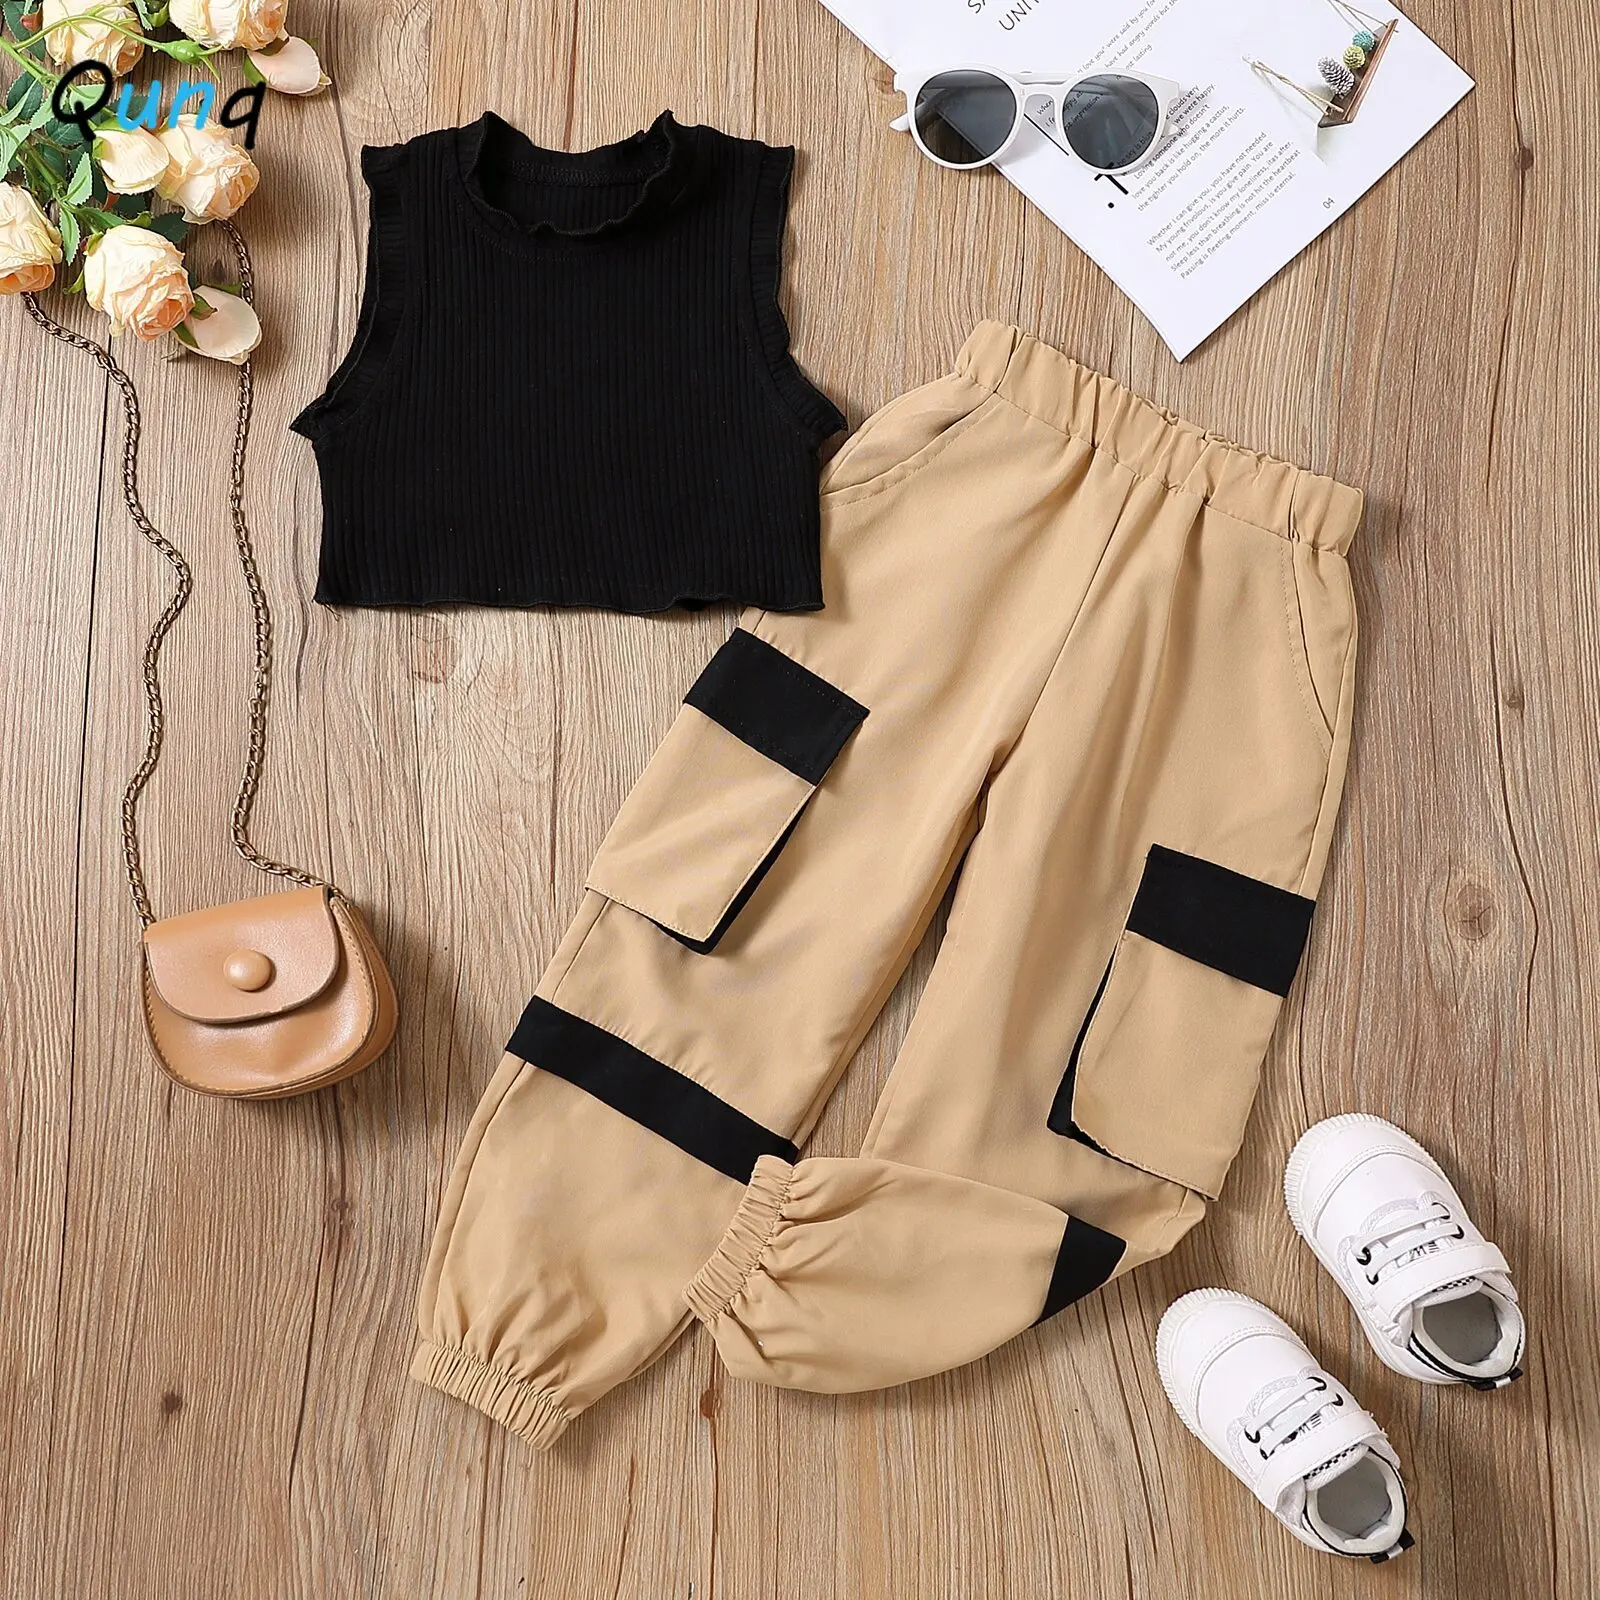 

Qunq 2023 Spring Summer New Girls O Neck Sleeveless Vest Top + Splice Overalls 2 Pieces Set Casual Sporty Kids Clothes Age 3T-8T